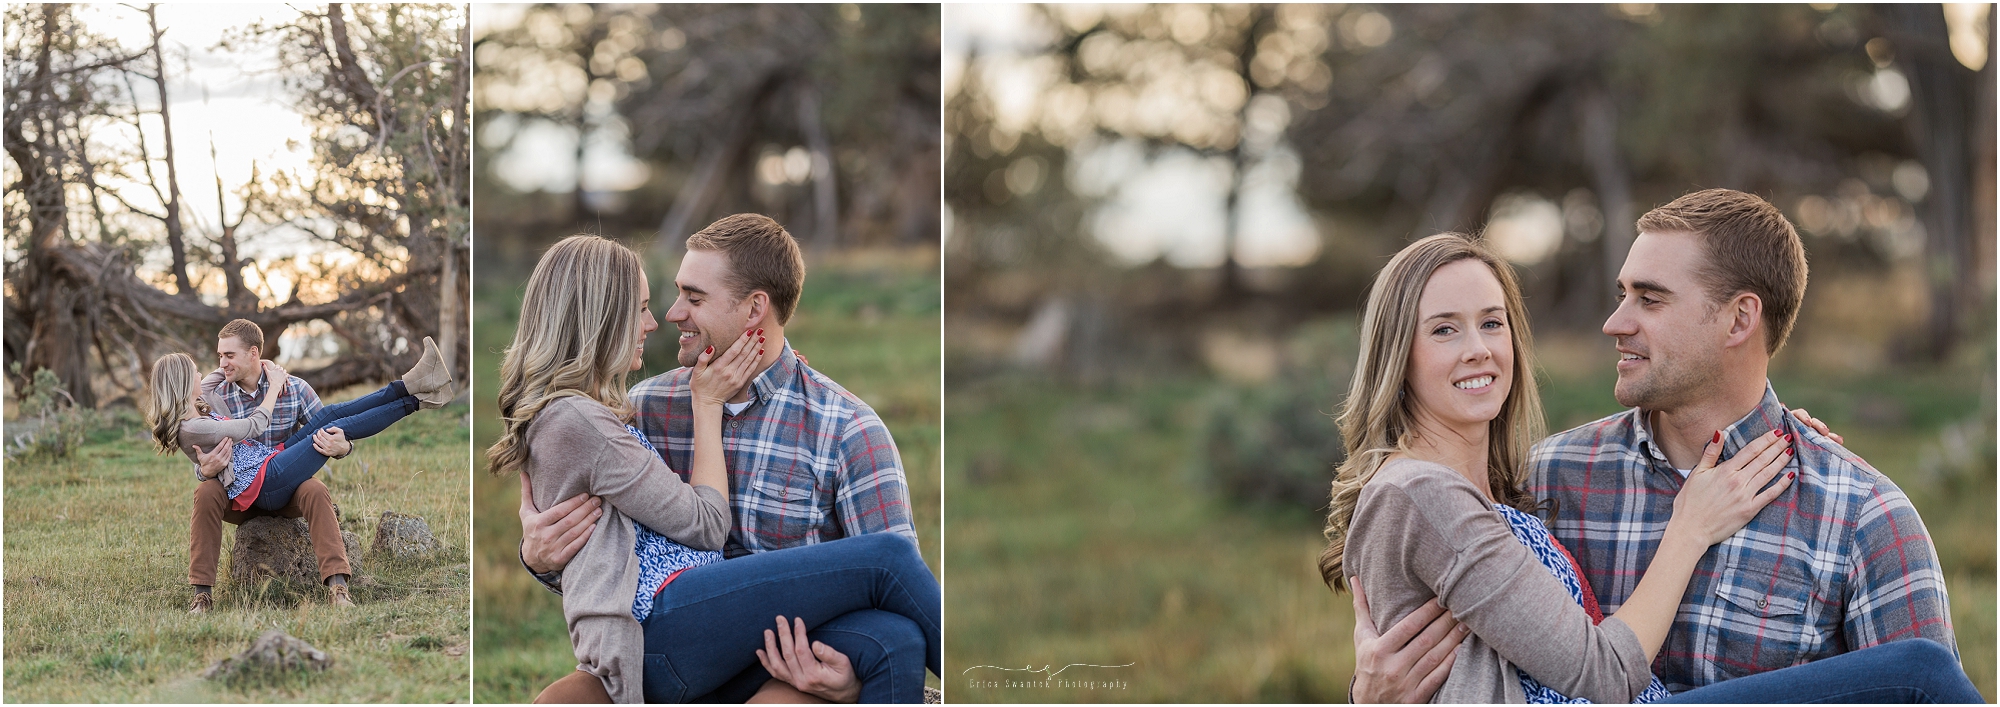 An outdoor lifestyle engagement session at a ranch in Powell Butte, OR with juniper trees, green grass and a beautiful engaged couple. 